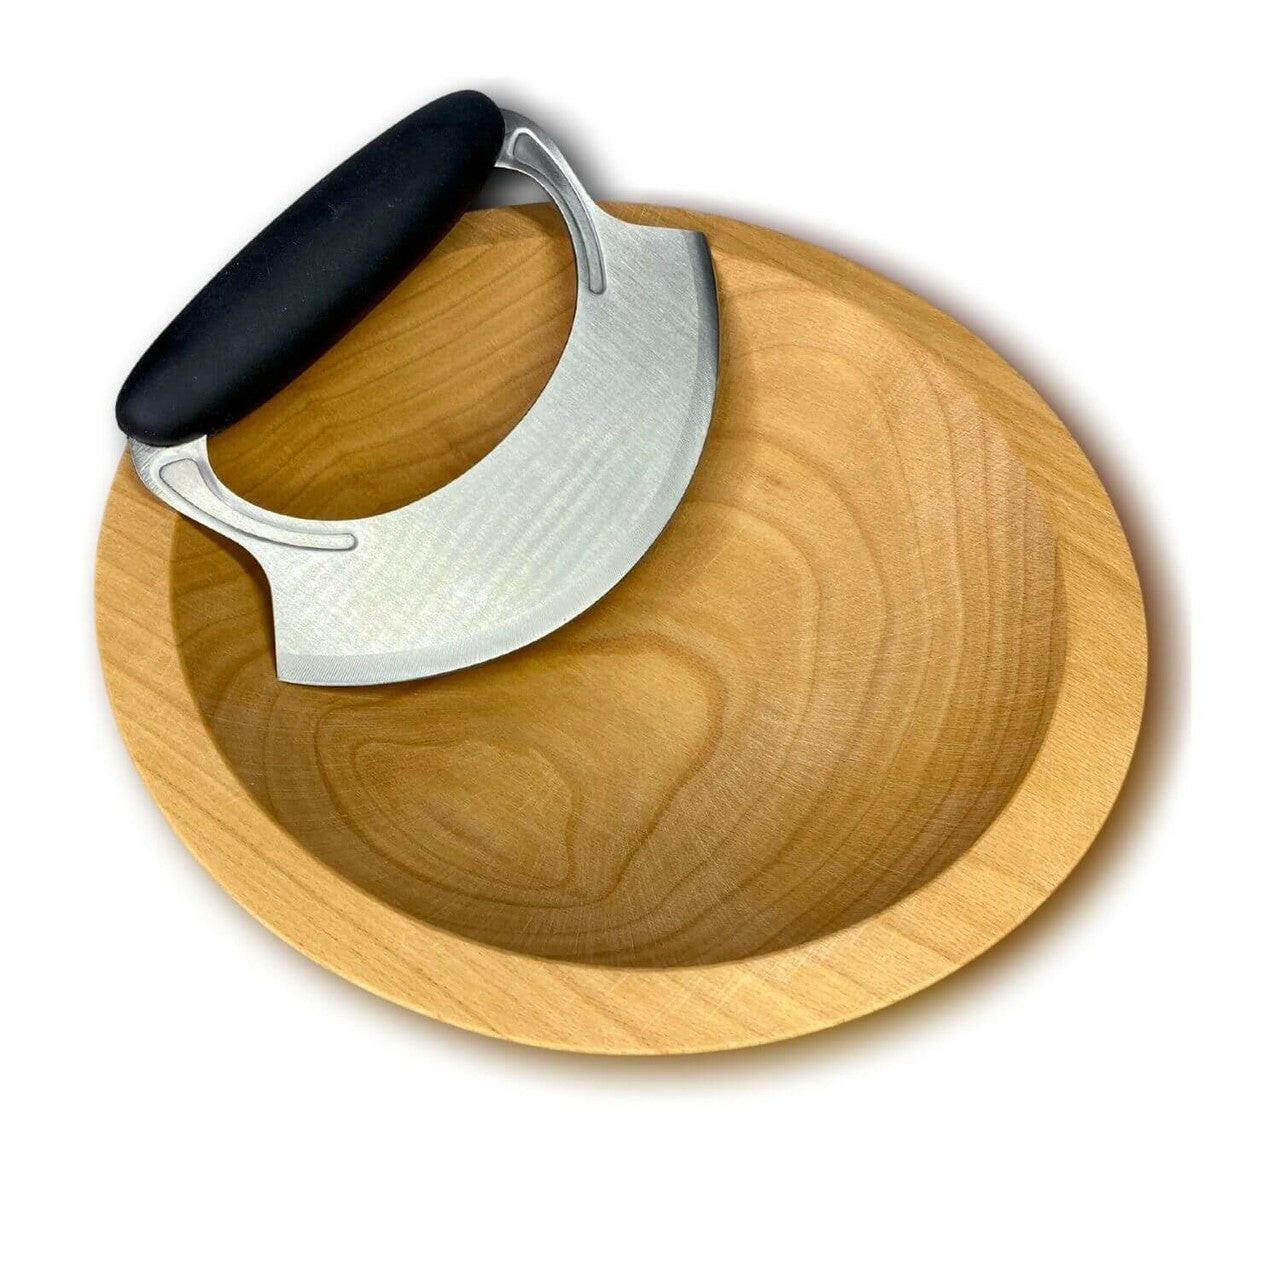 Caesar Salad for One, 9" Wooden Chop Bowl with New Upgraded Chef's Mezzaluna Bowls American Farmhouse Bowls   